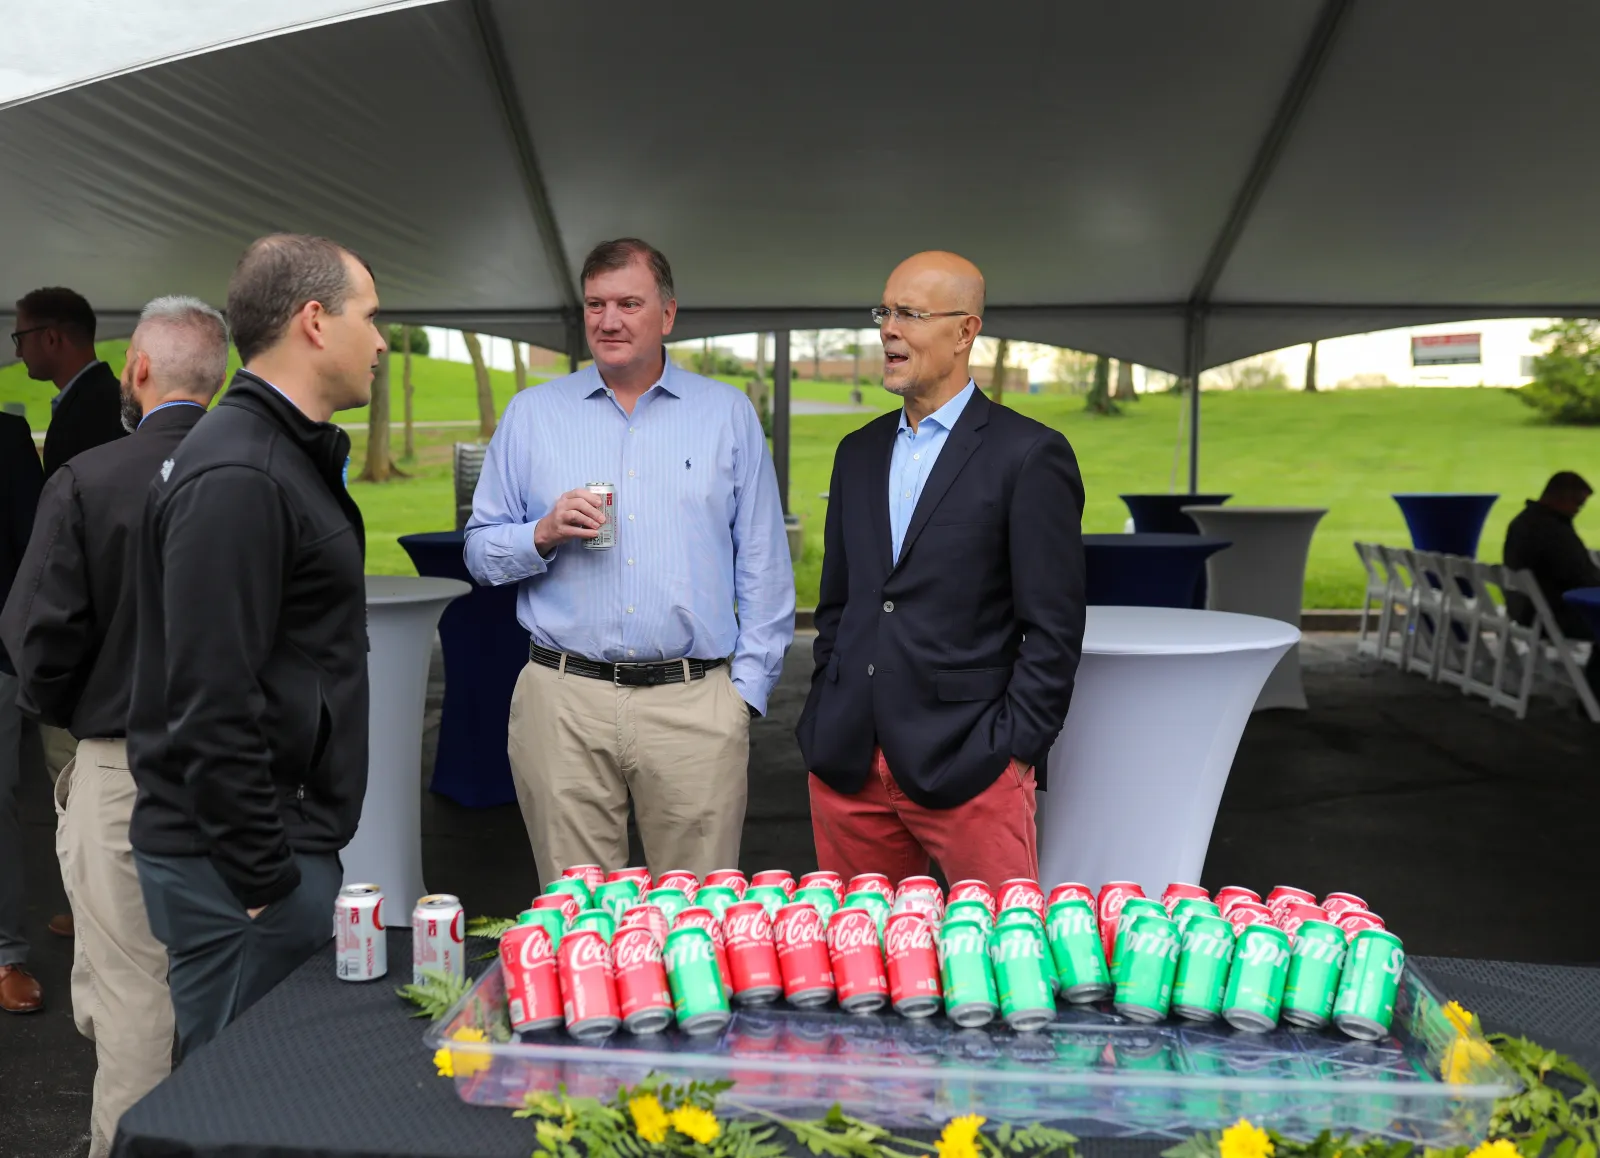 a group of men standing around a table with cups on it